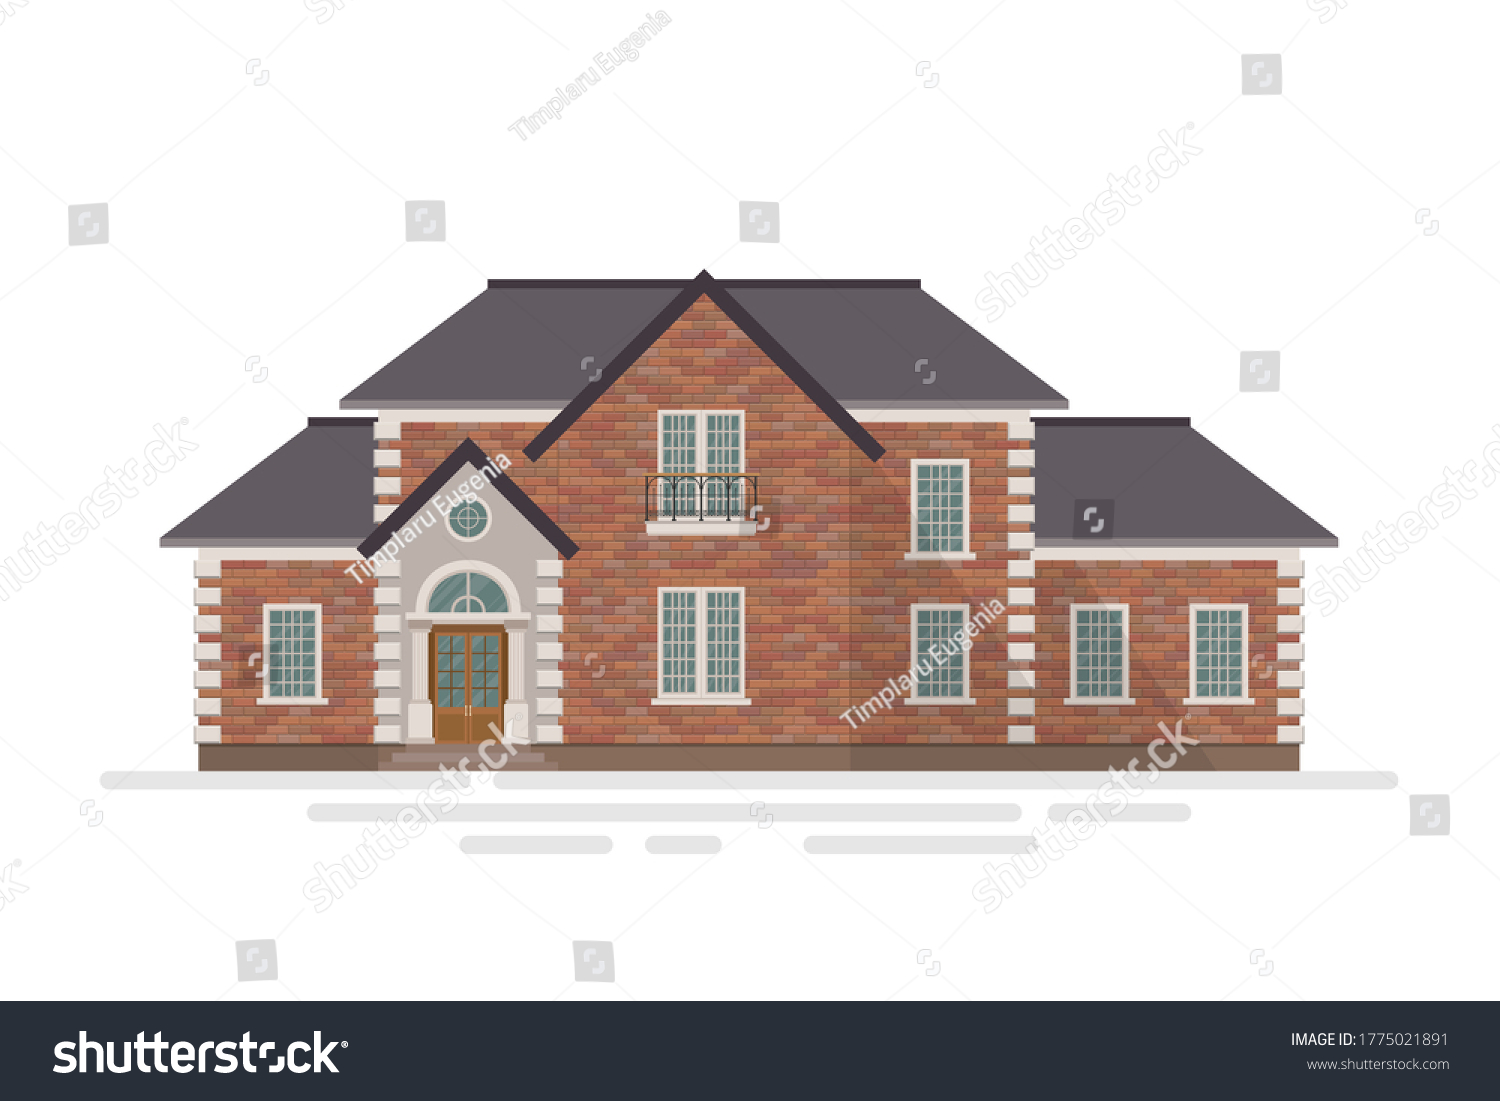 SVG of Brick house building vector illustration isolated on white background svg